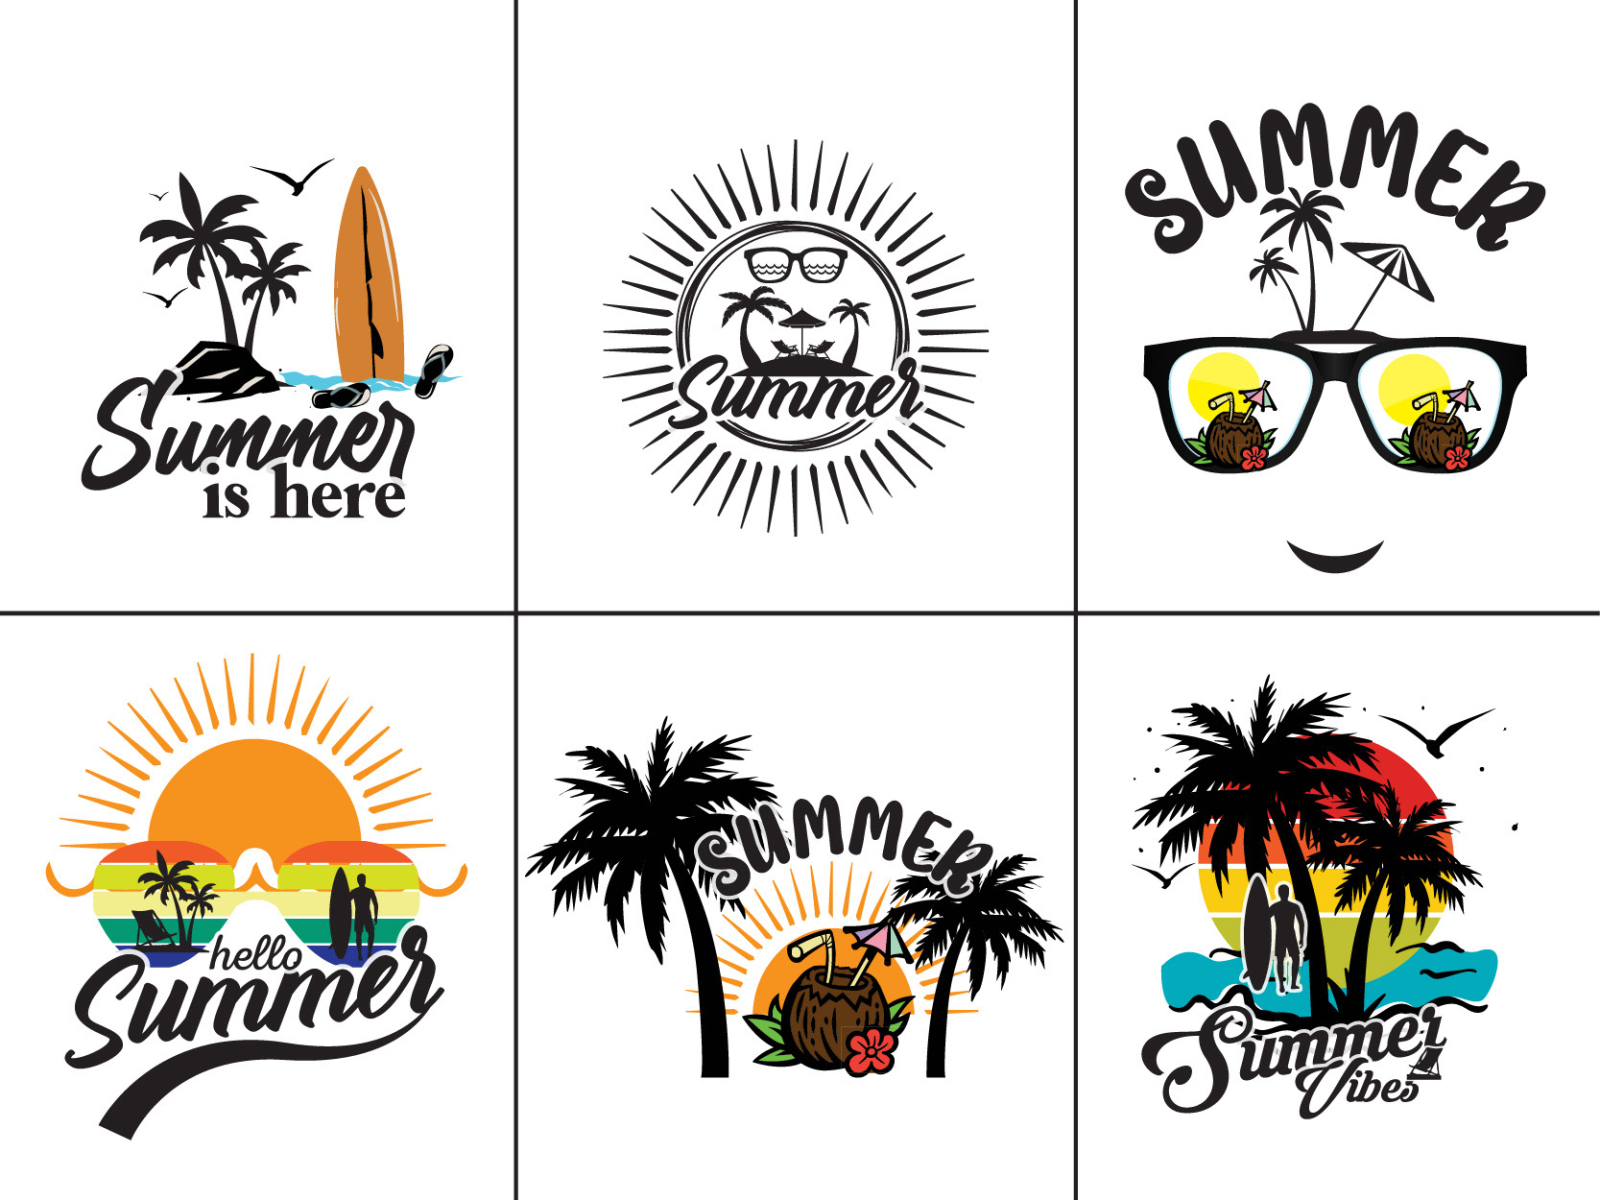 Summer t-shirt design by Taslima Akther Lina on Dribbble